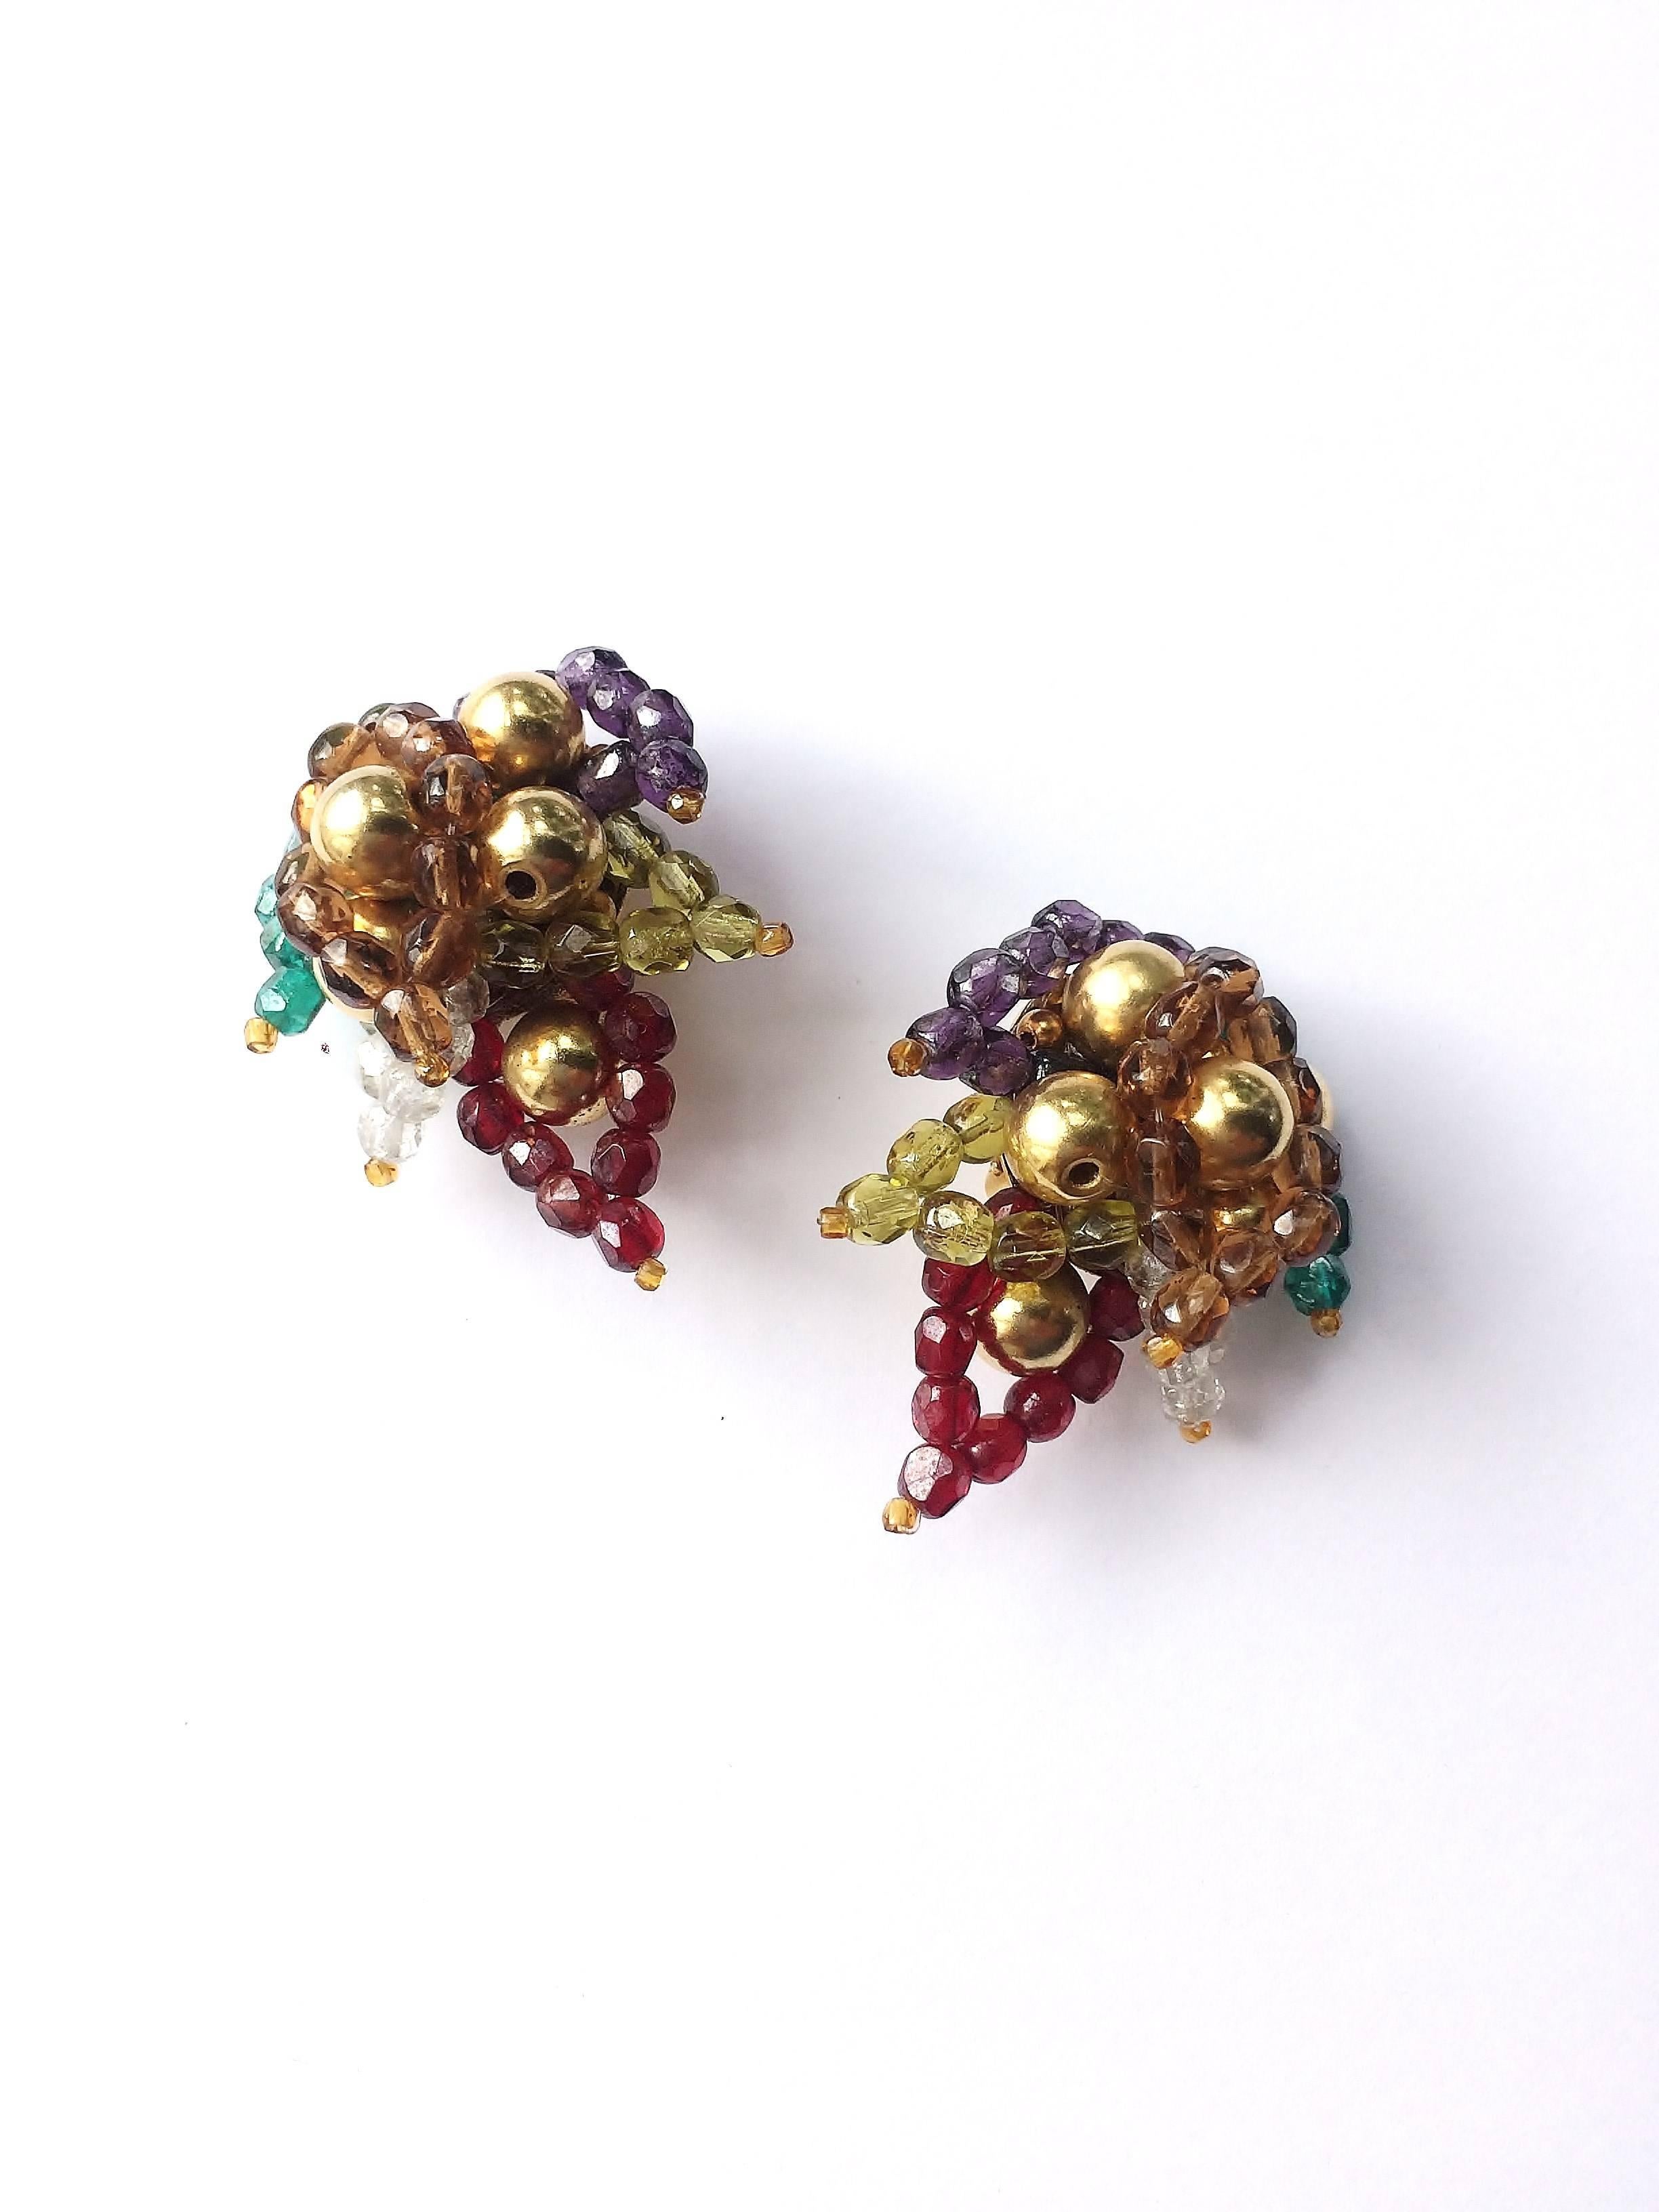 Fresh and warm colours, highlighted with gilt balls, make these earrings, by Coppola e Toppo from the 1960s, stylish and glamorous.
Made with Bohemian half crystal beads, in a three dimensional 'paisley leaf' design, they are light and easy to wear.